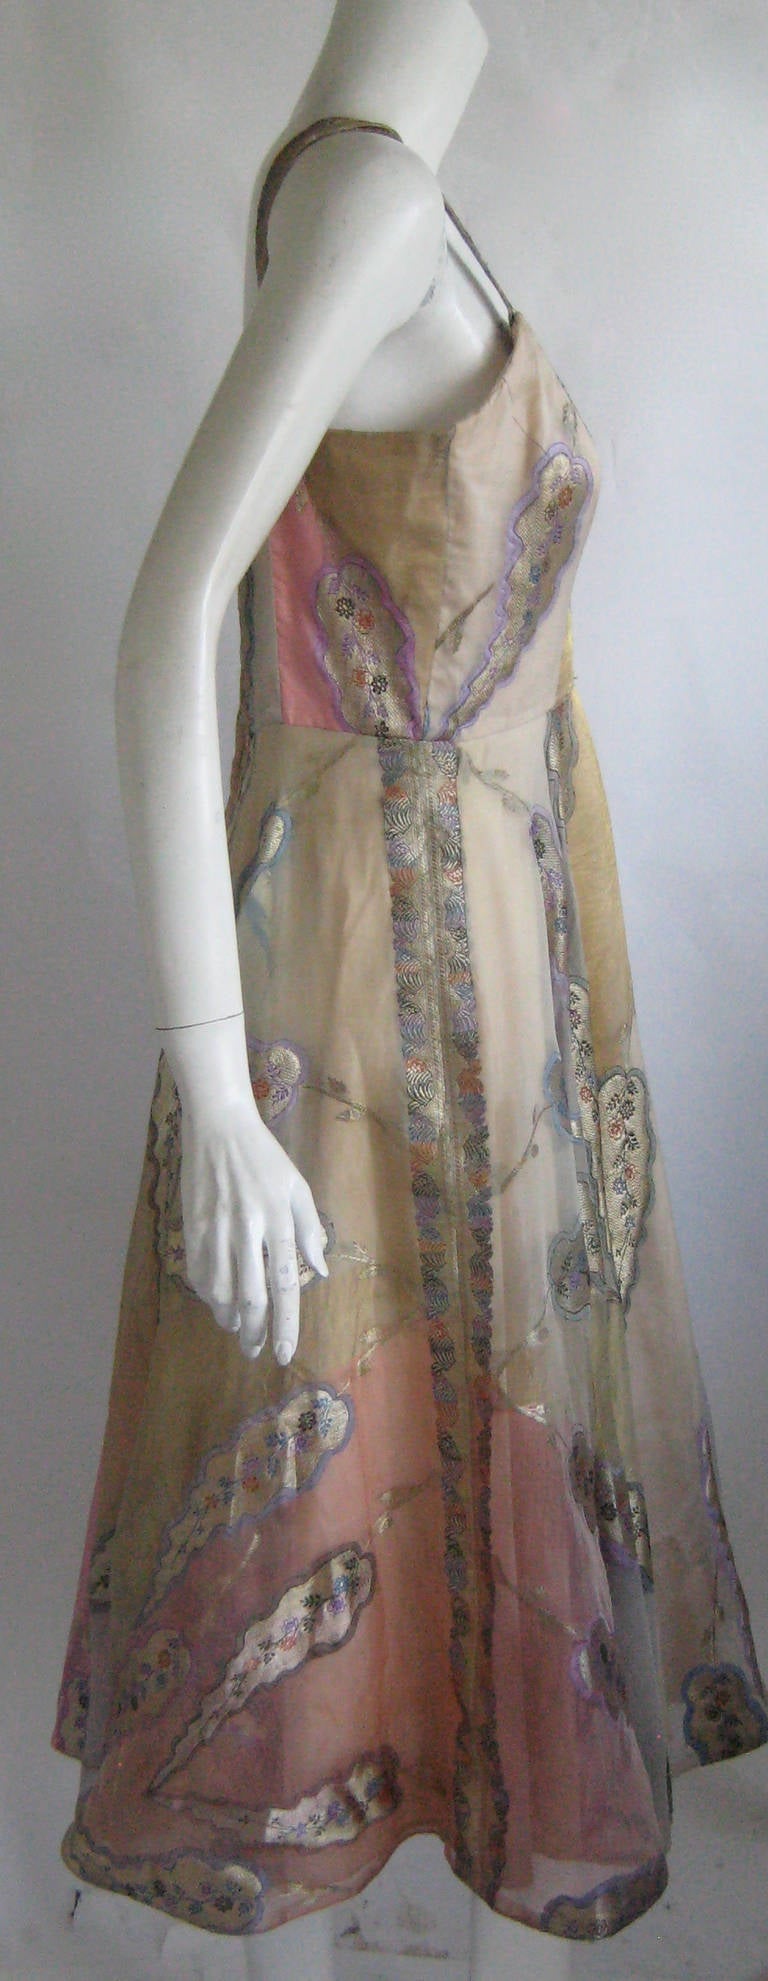 Simply stunning 1950s hawaiian dress
The prettiest we have ever seen !
Rayon taffeta underdress with multi color silk lame organza overdress
Metal zipper up the back
Good to very good condition , wearable with care  there is an 1/8 